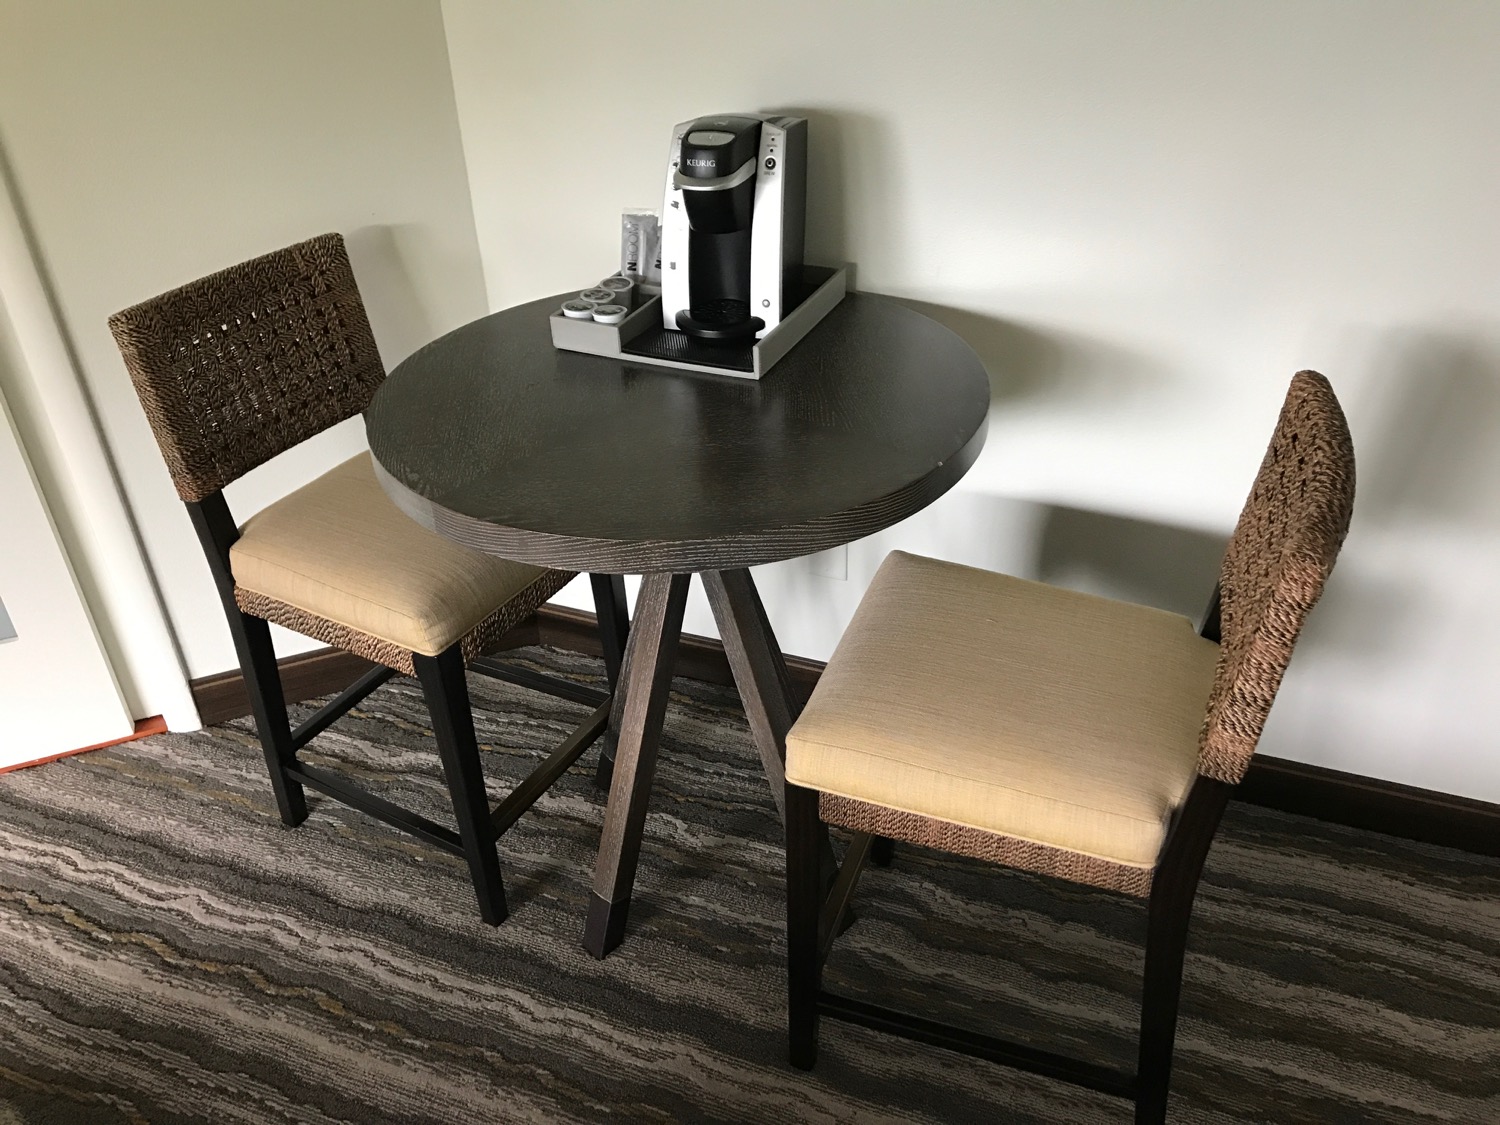 a table with two chairs